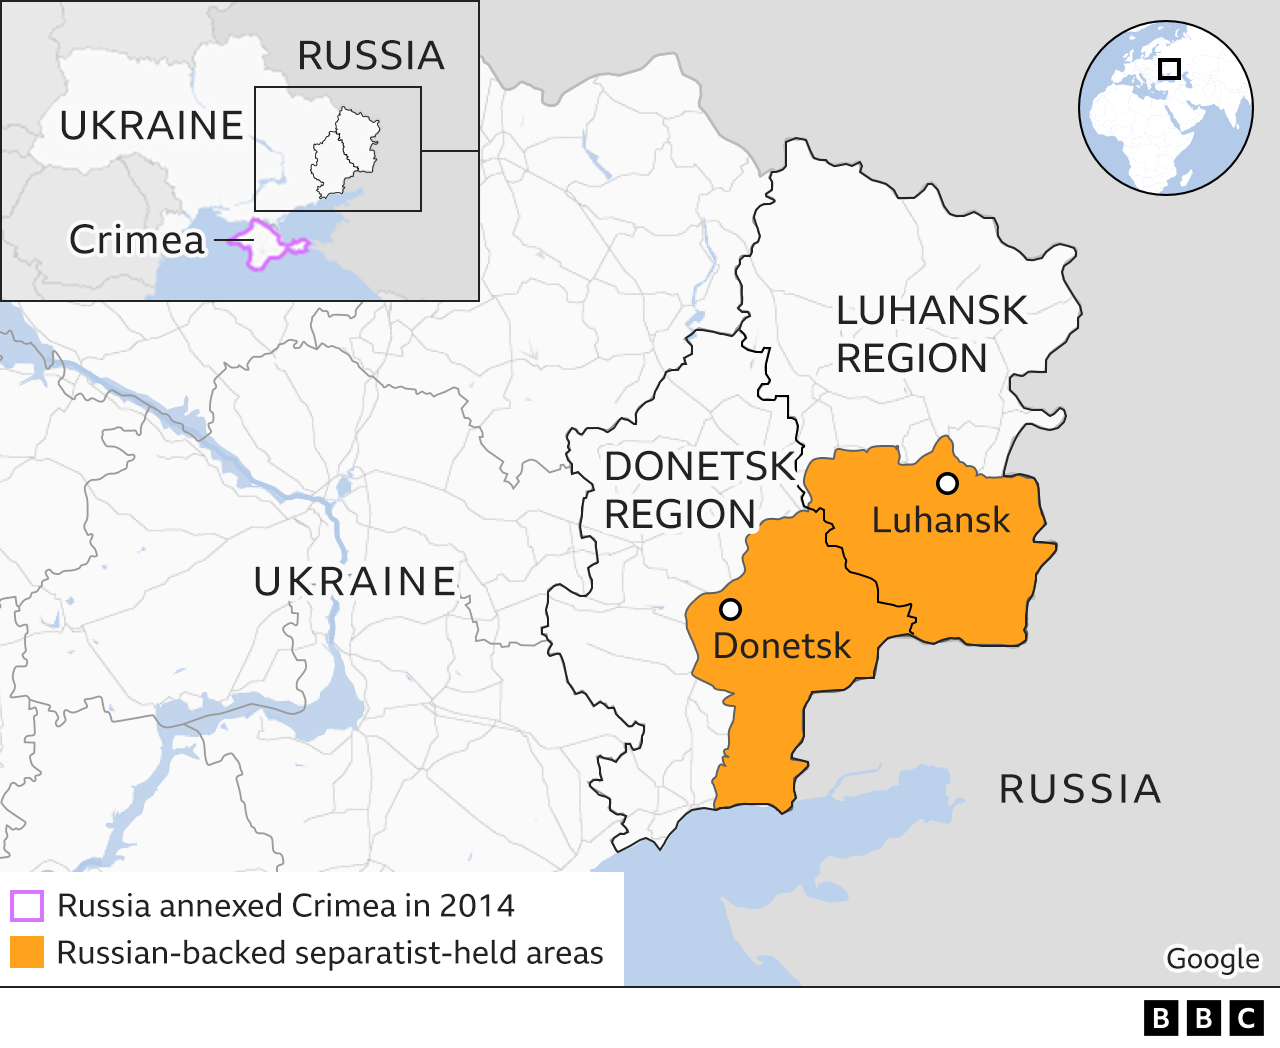 Map showing Donetsk and Luhansk areas of eastern Ukraine